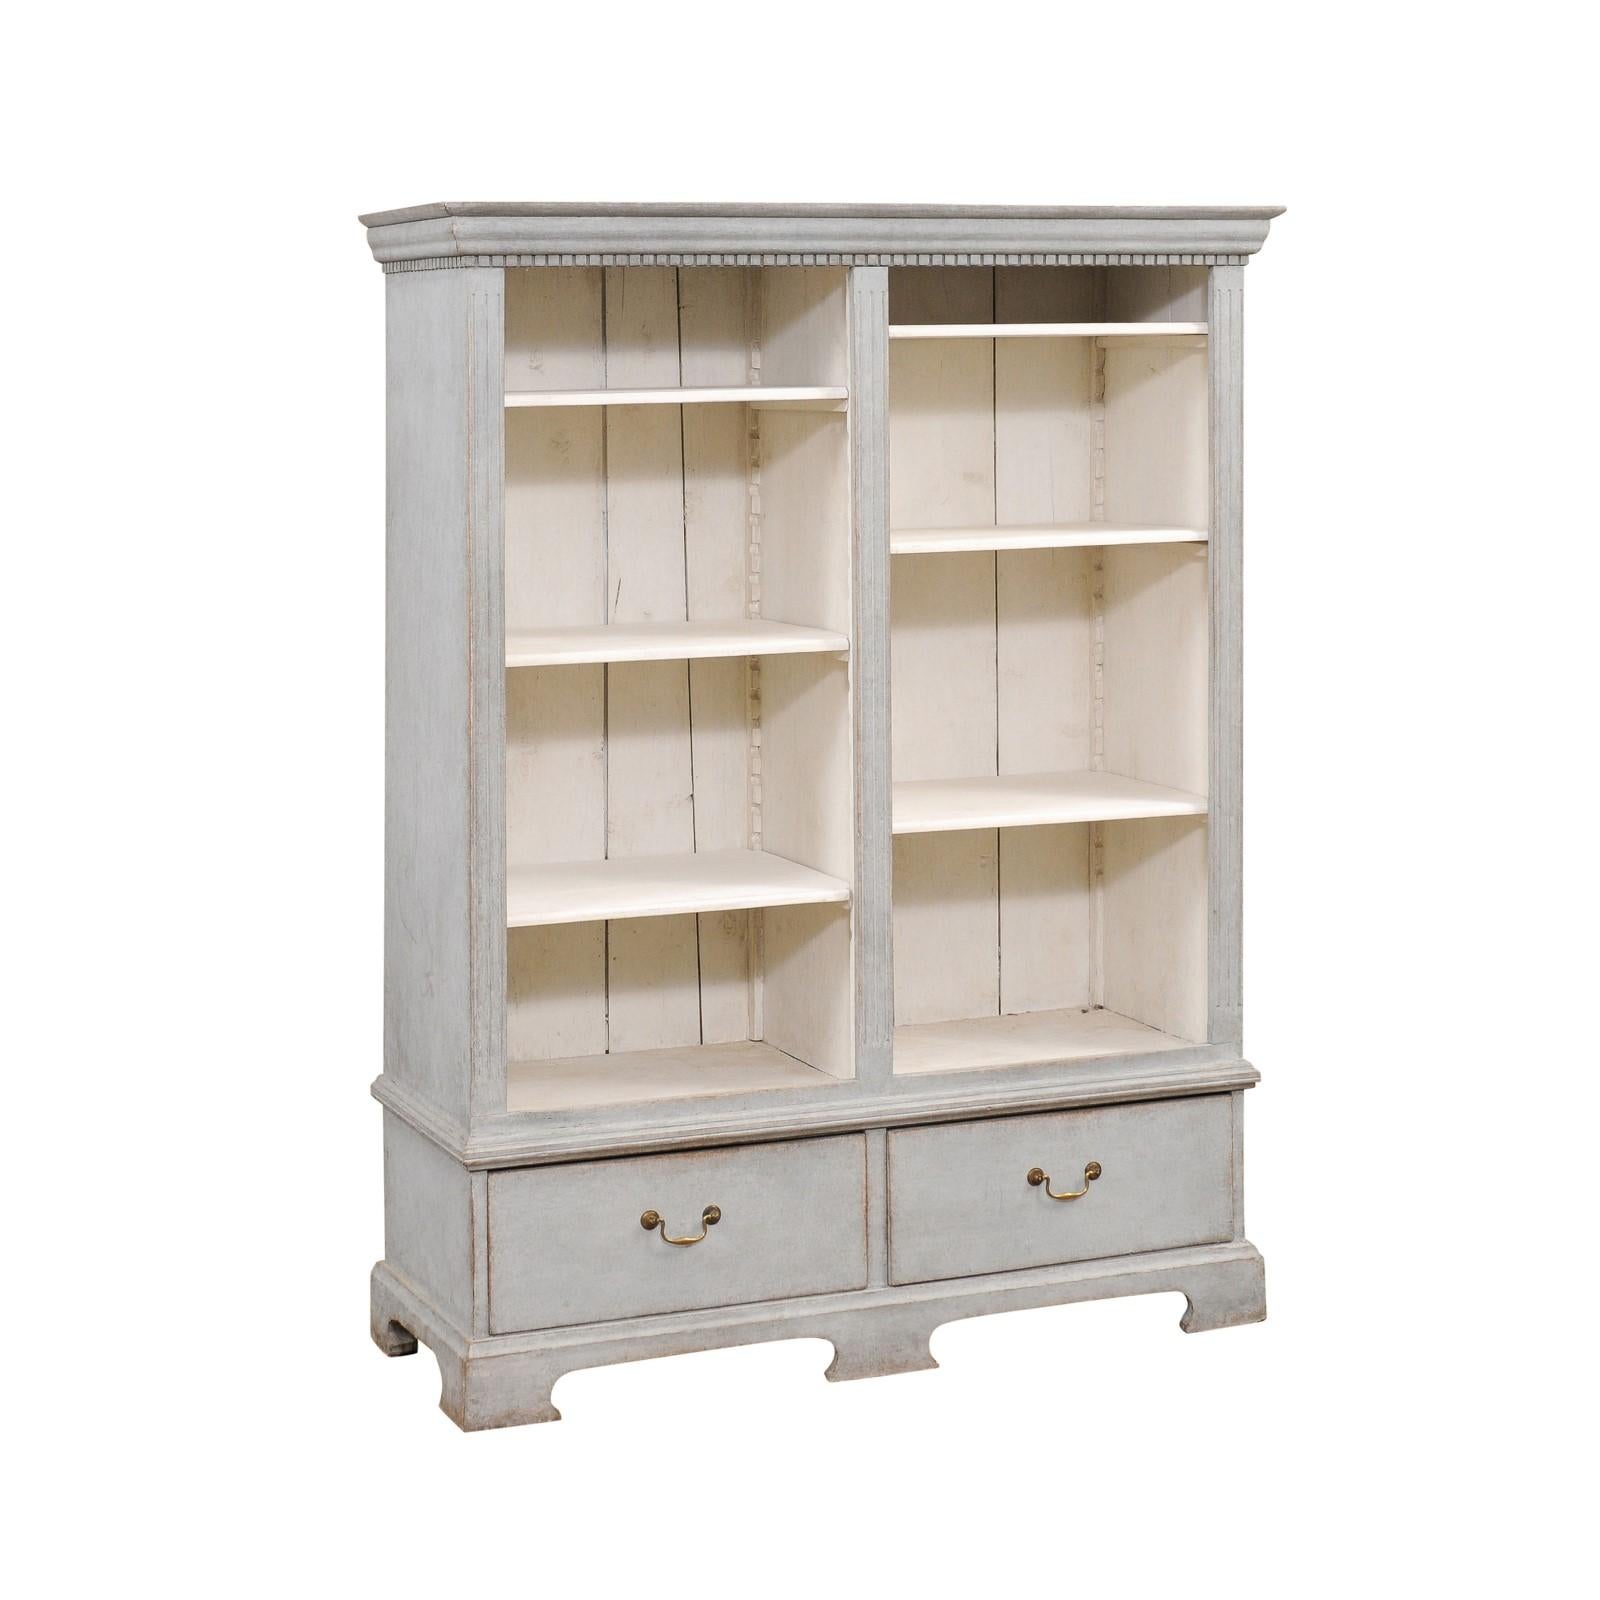 A Swedish wooden bookcase from circa 1850 with gray painted finish, carved dentil molding, open shelves, two drawers and bracket feet. This Swedish wooden bookcase from around 1850 stands as a testament to the timeless allure of antique